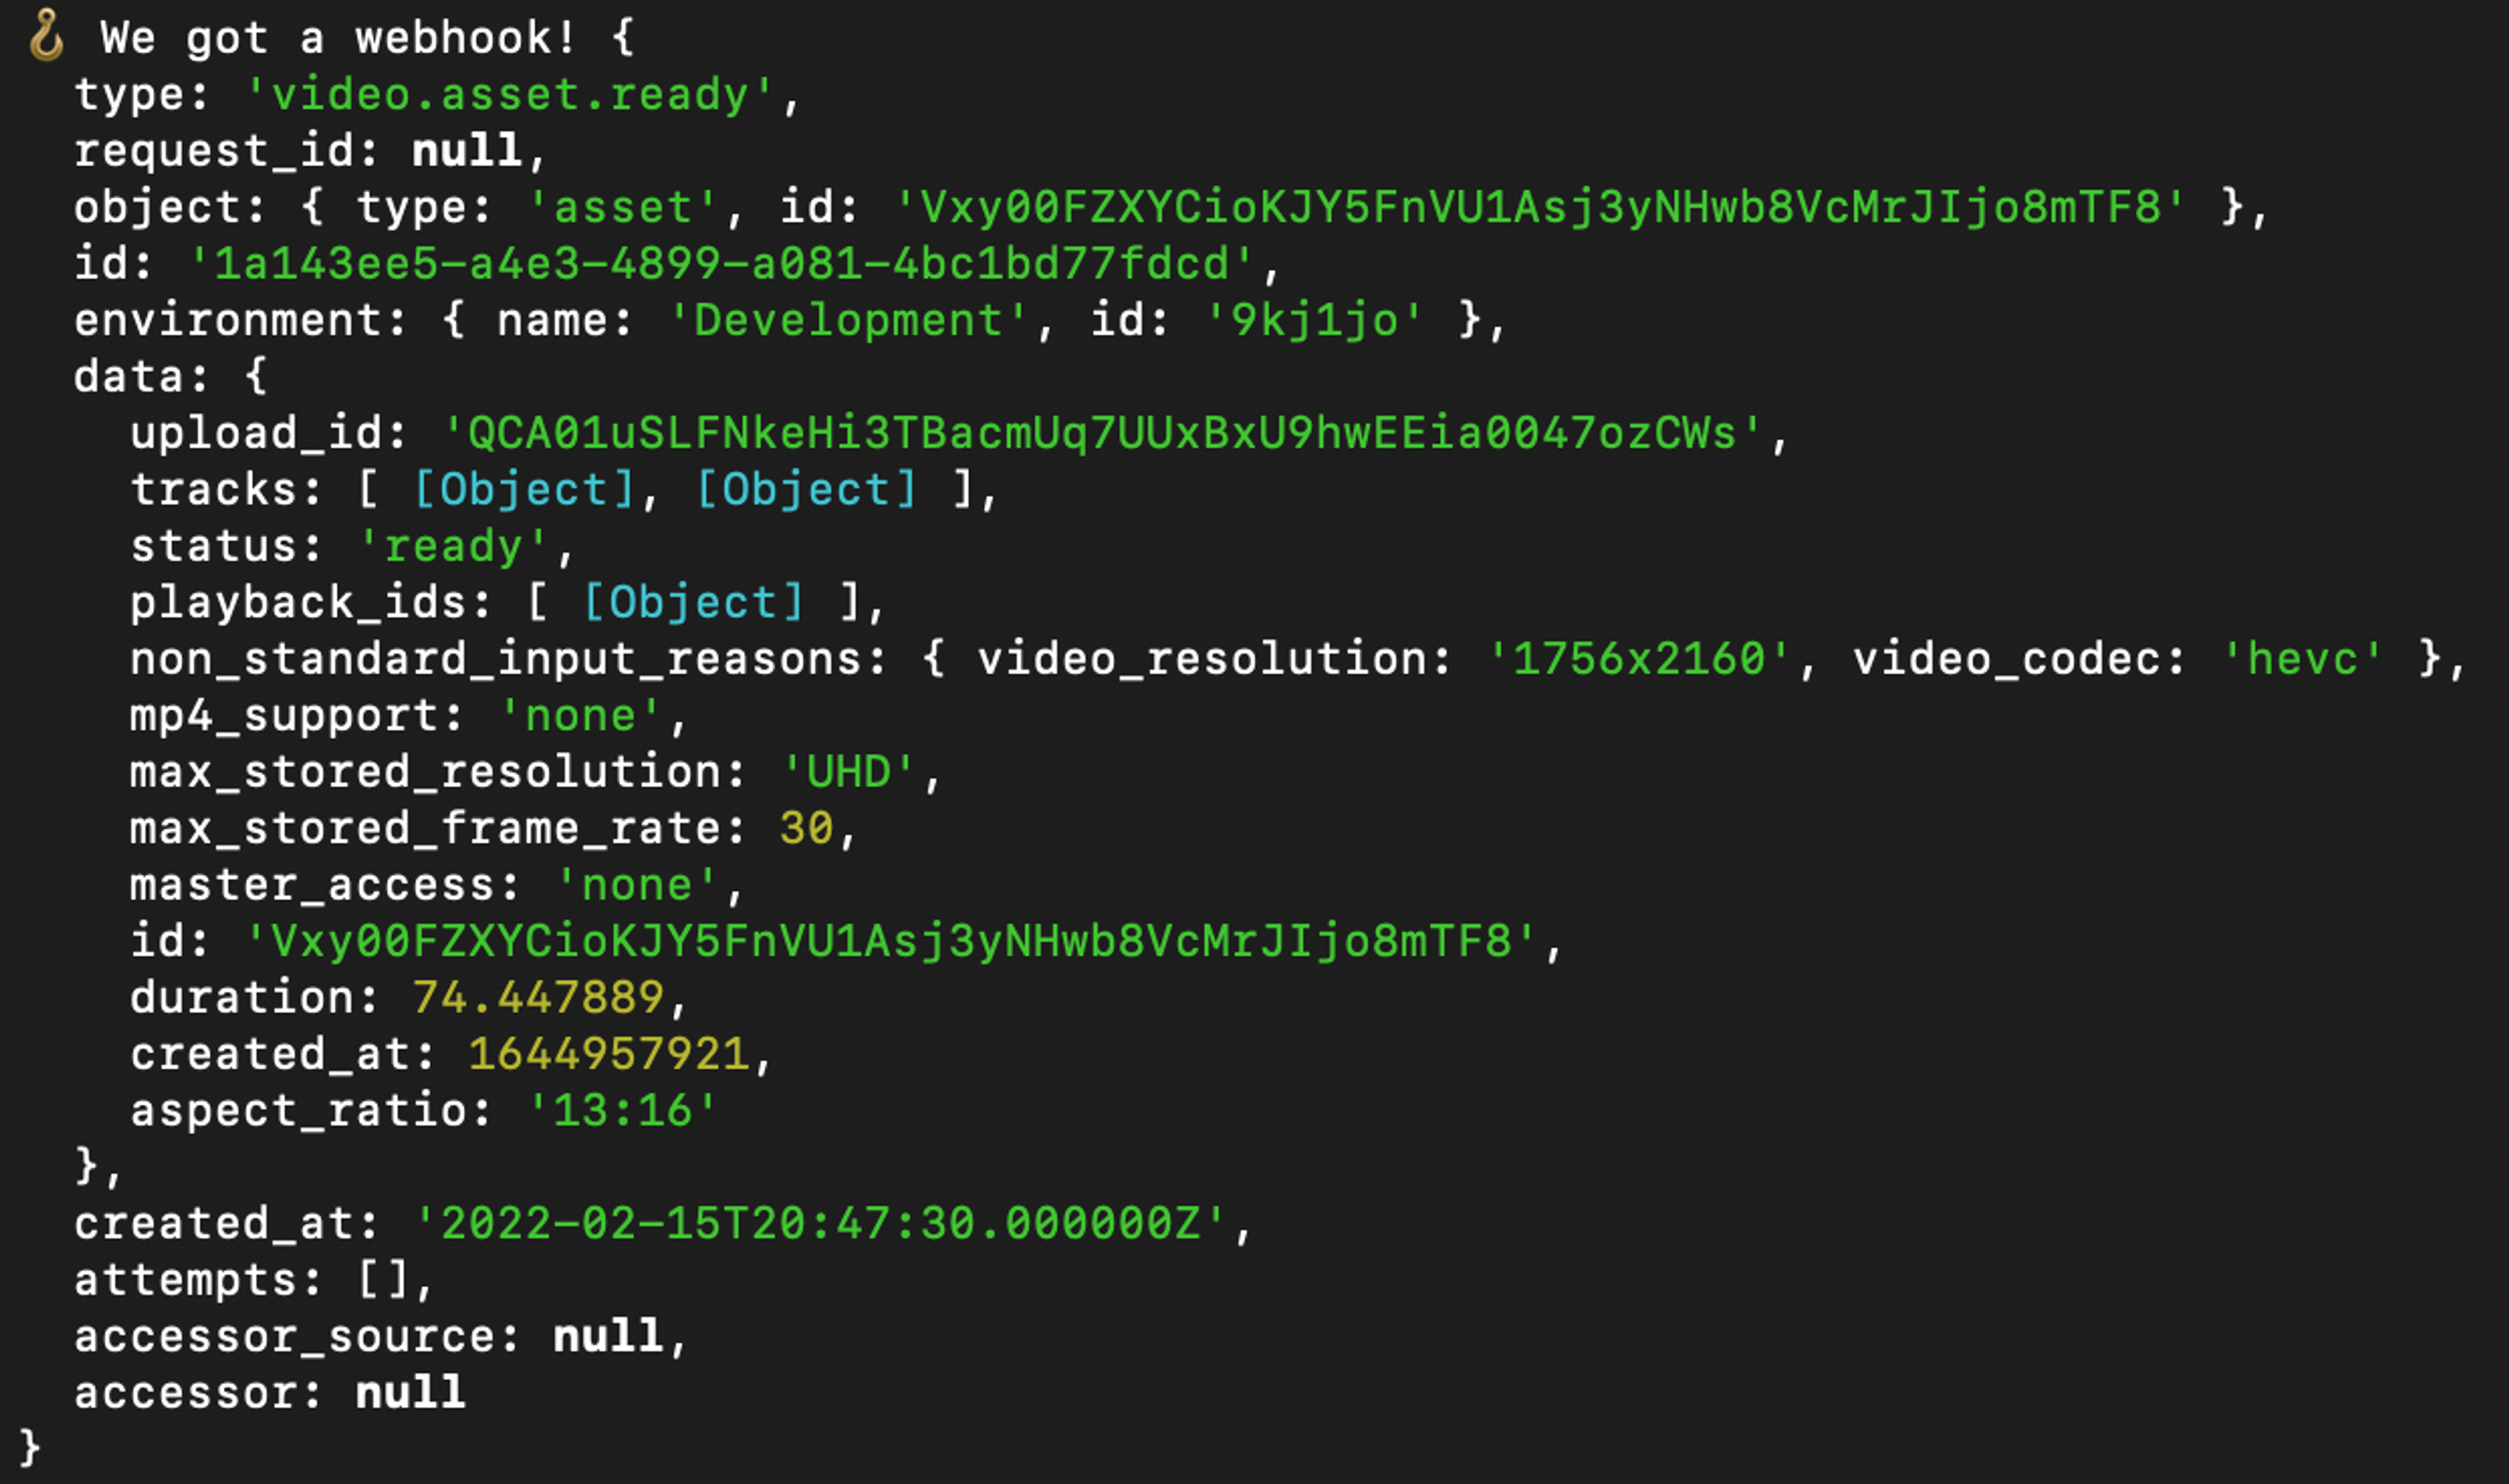 A JSON object in the terminal representing a webhook with type: video.asset.ready.